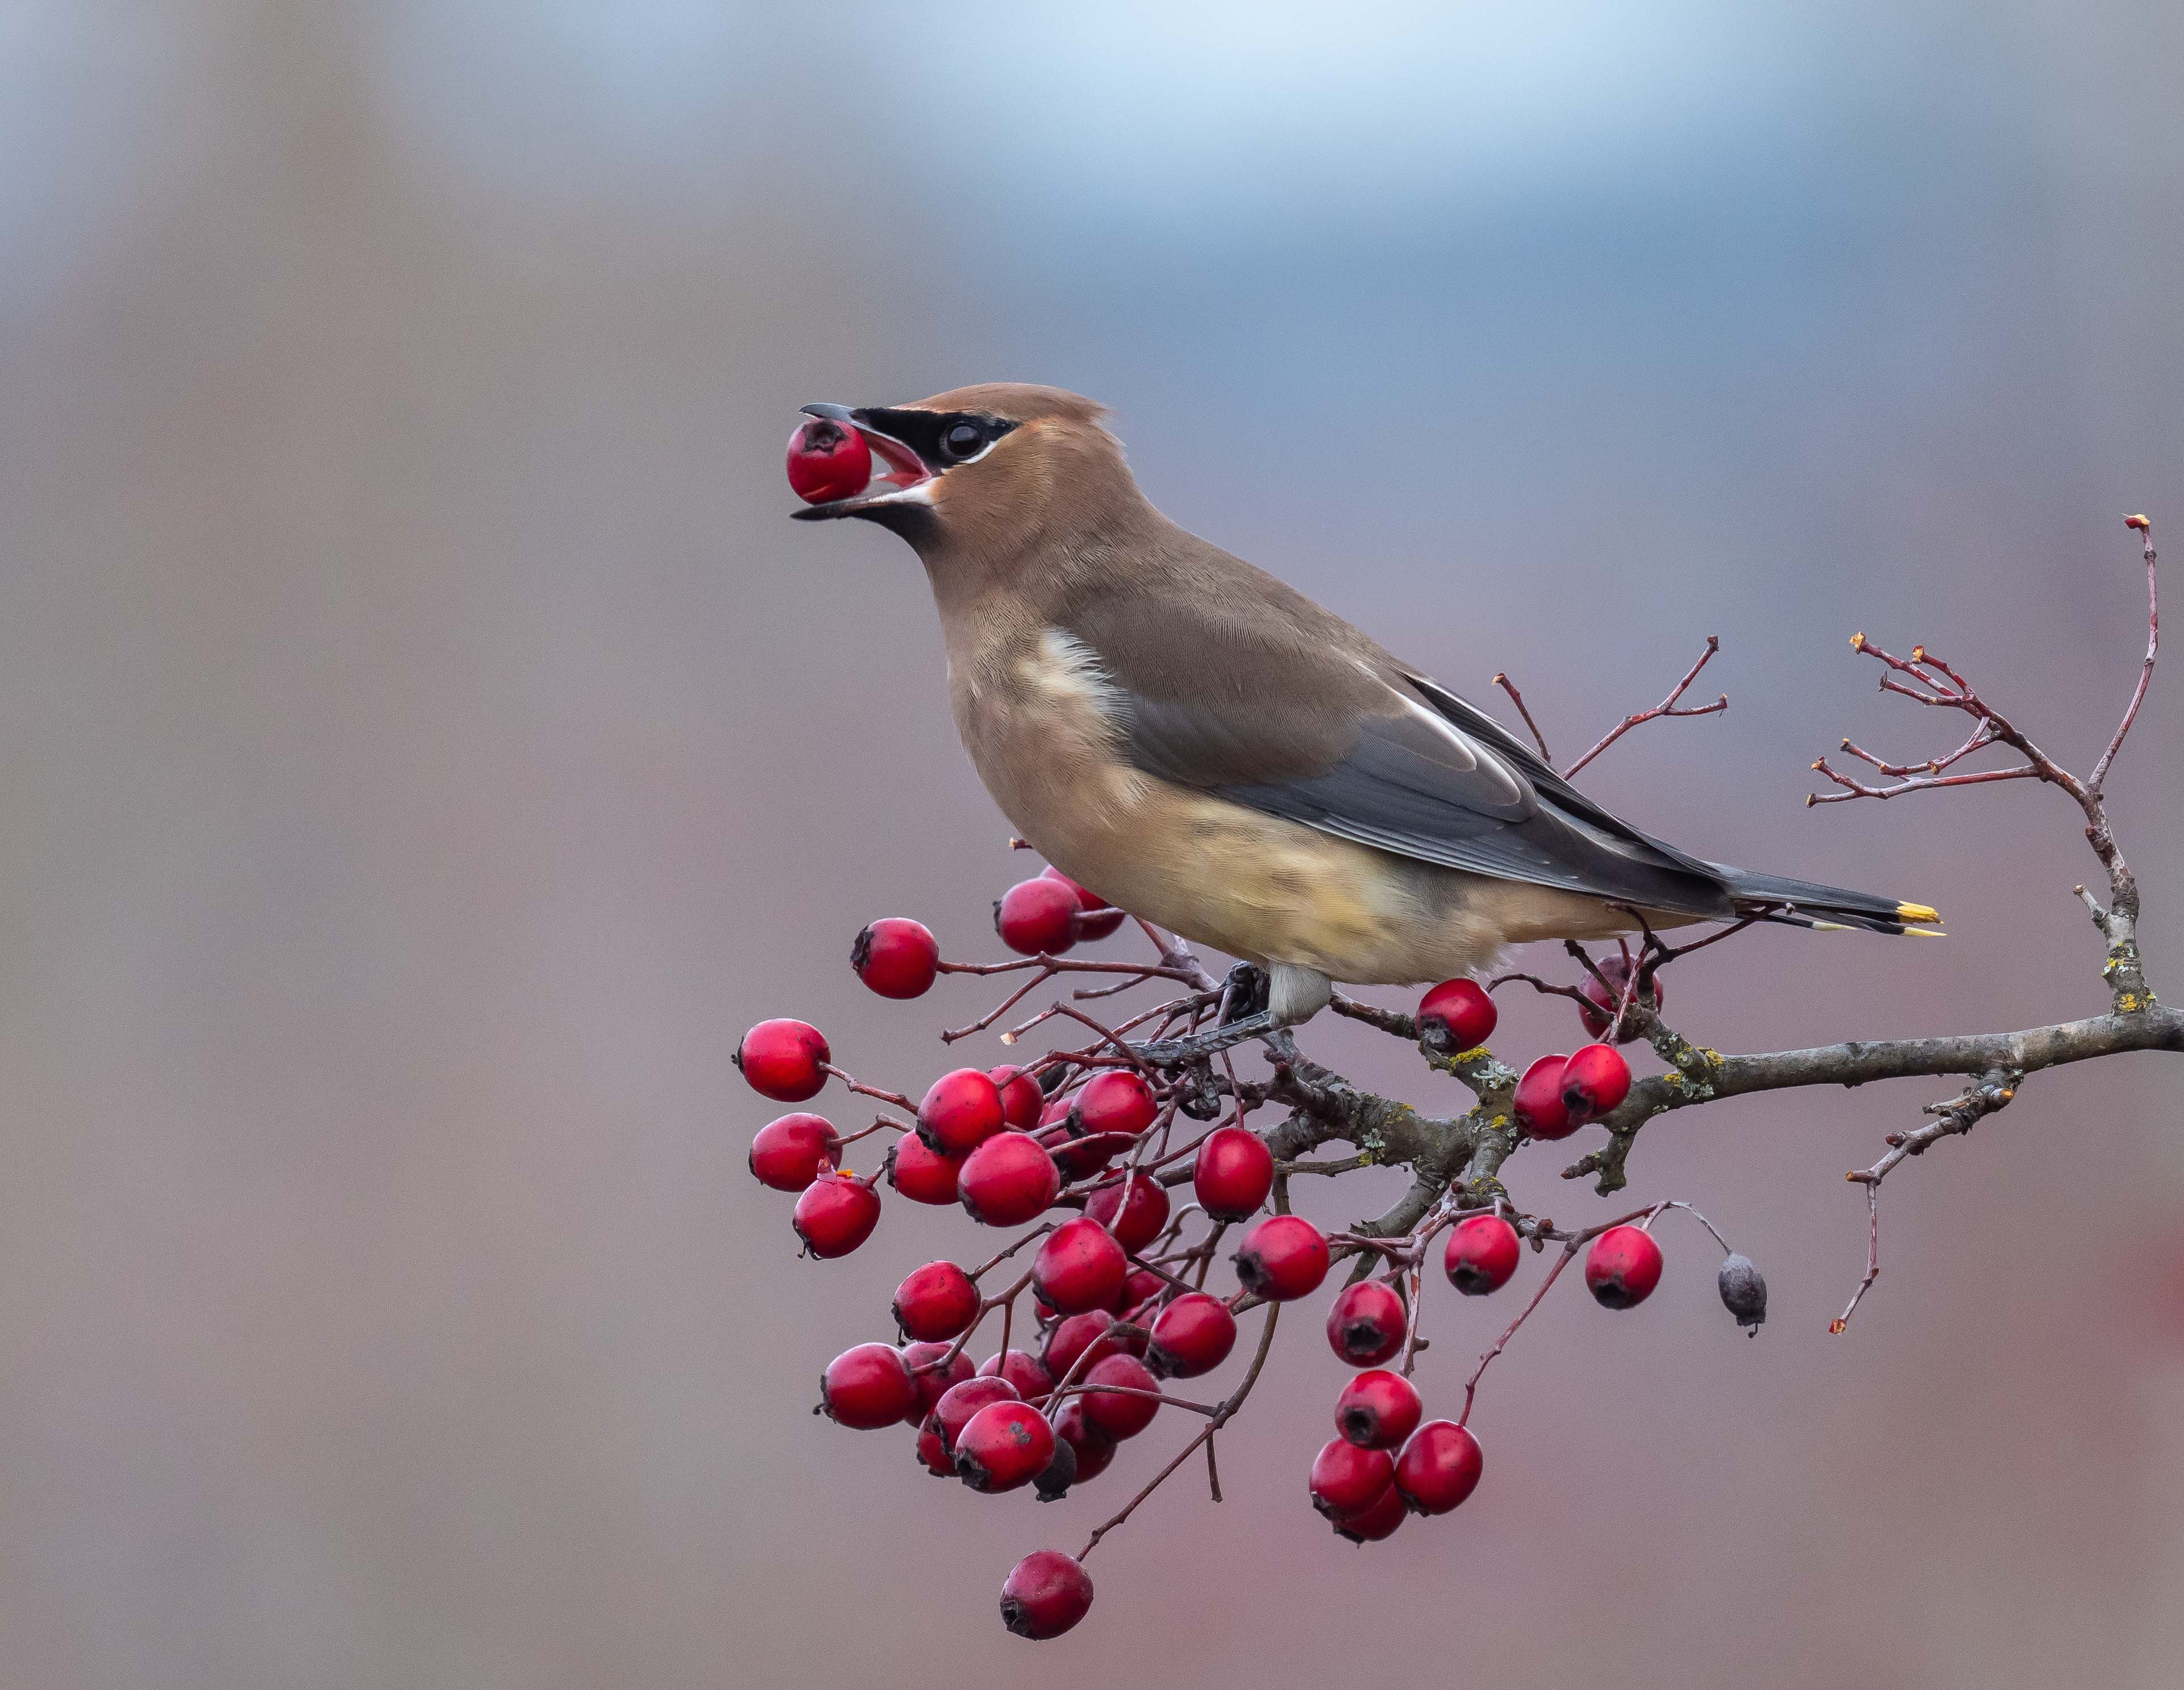 Cedar Waxwing perched on a branch while eating berries